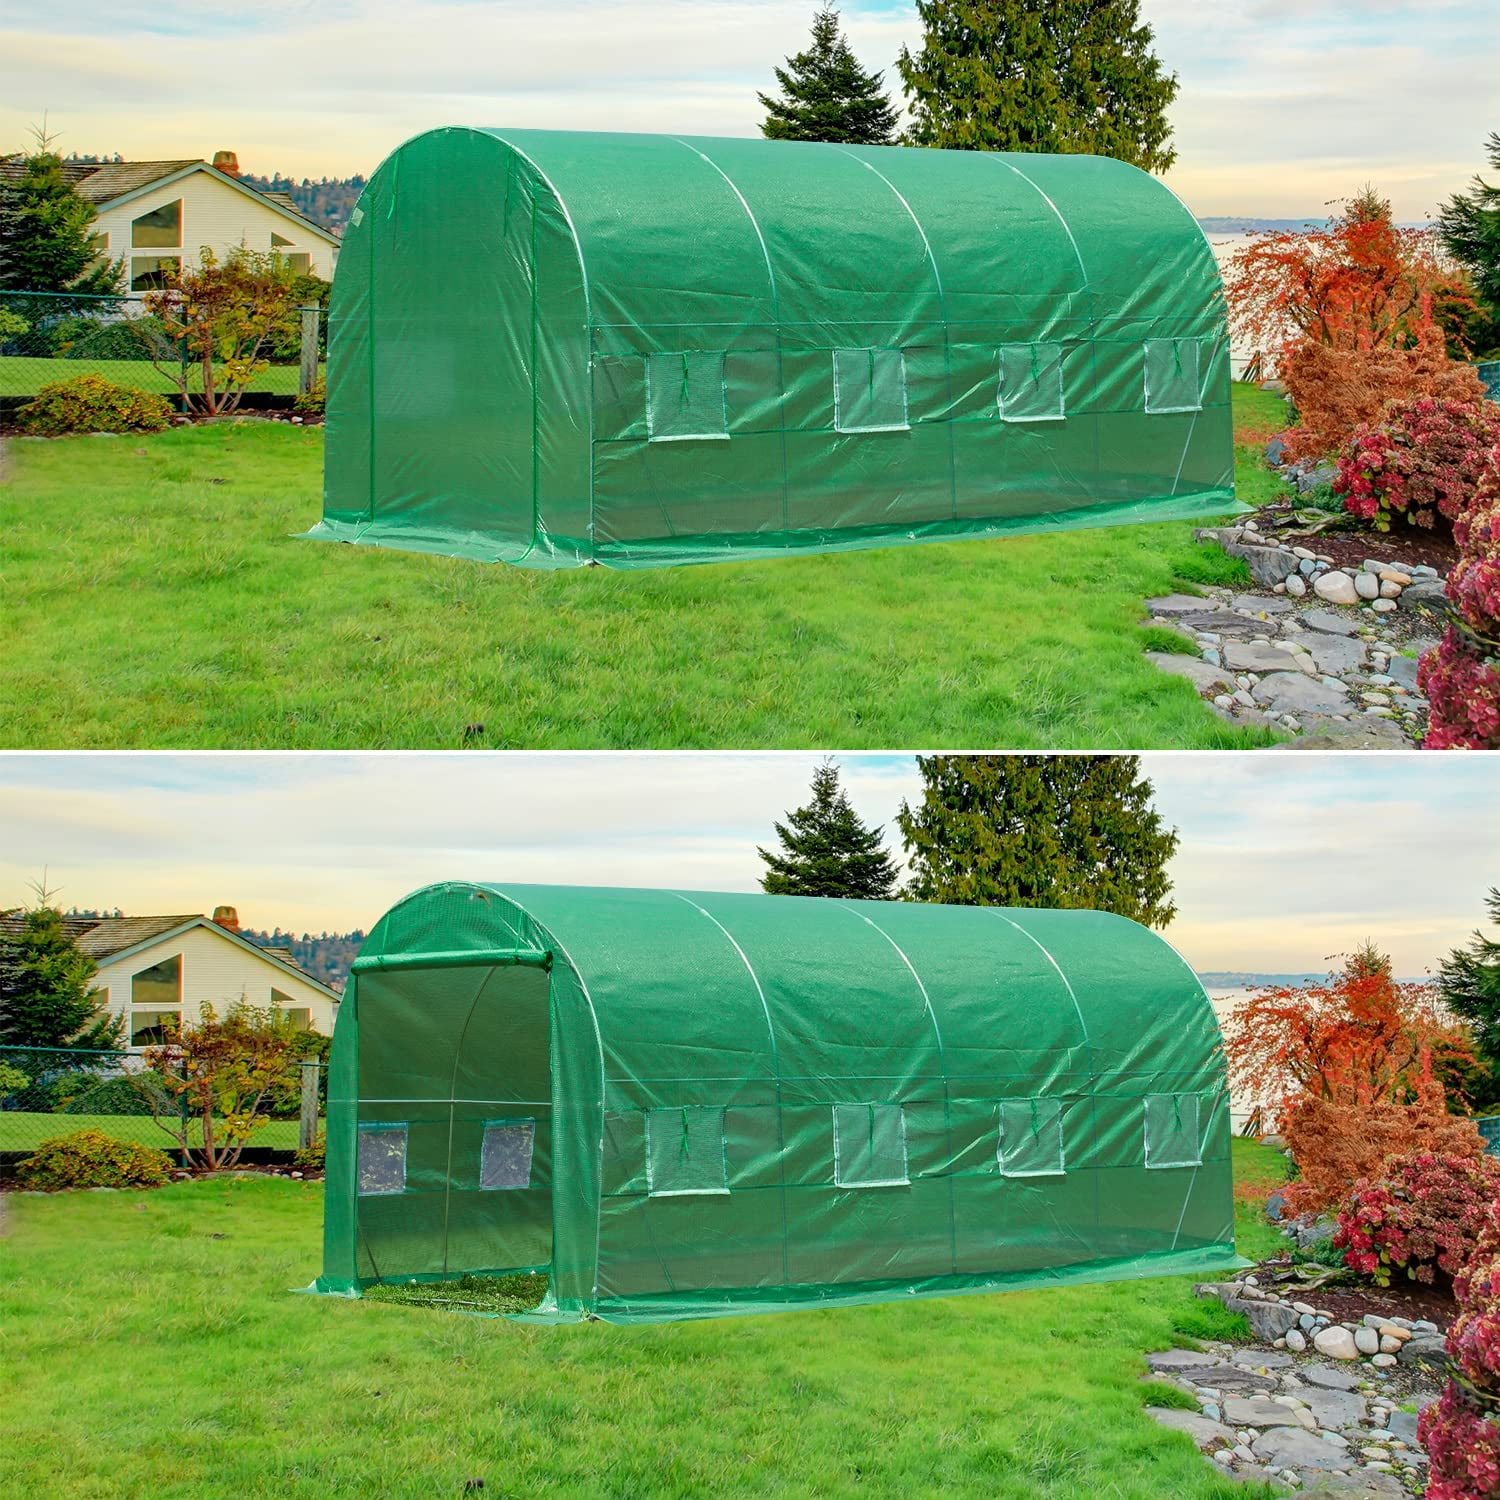 Upgraded Large Walk-in Greenhouse Tunnel Garden Plant Hot Green House for Outside Heavy Duty Winter EROMMY 15'×6.6'×6.6' Greenhouse Green Portable Greenhouse with Reinforced Frame&8 Screen Windows 